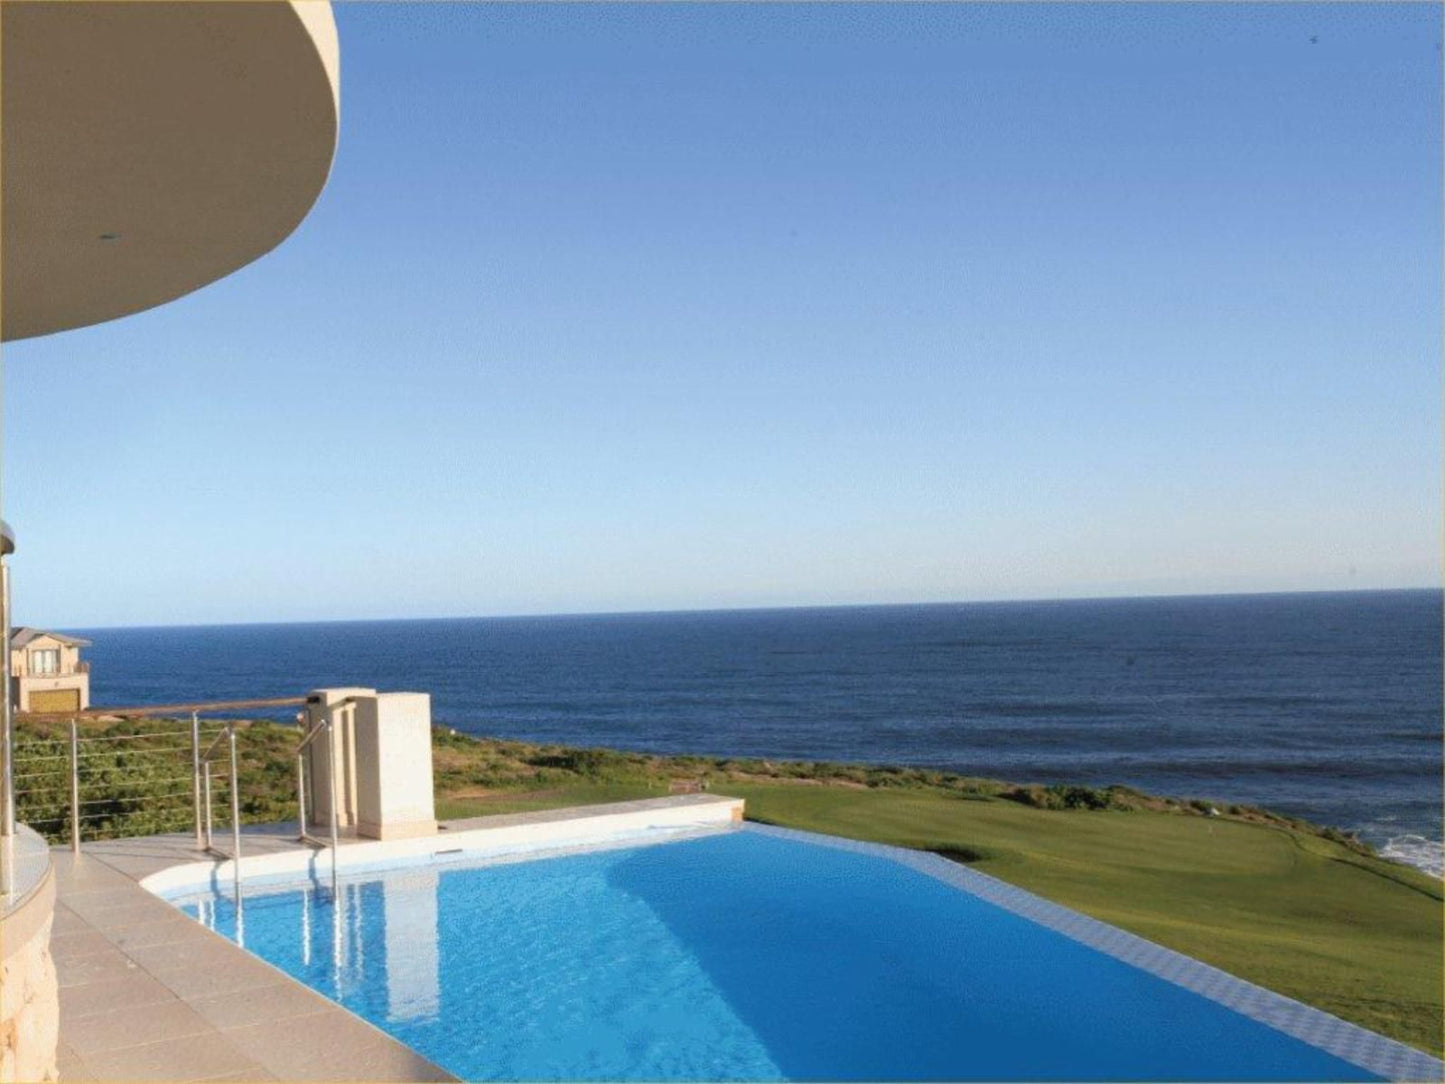 Leisure Rentals Pinnacle Point Golf Estate Pinnacle Point Mossel Bay Western Cape South Africa Beach, Nature, Sand, Swimming Pool